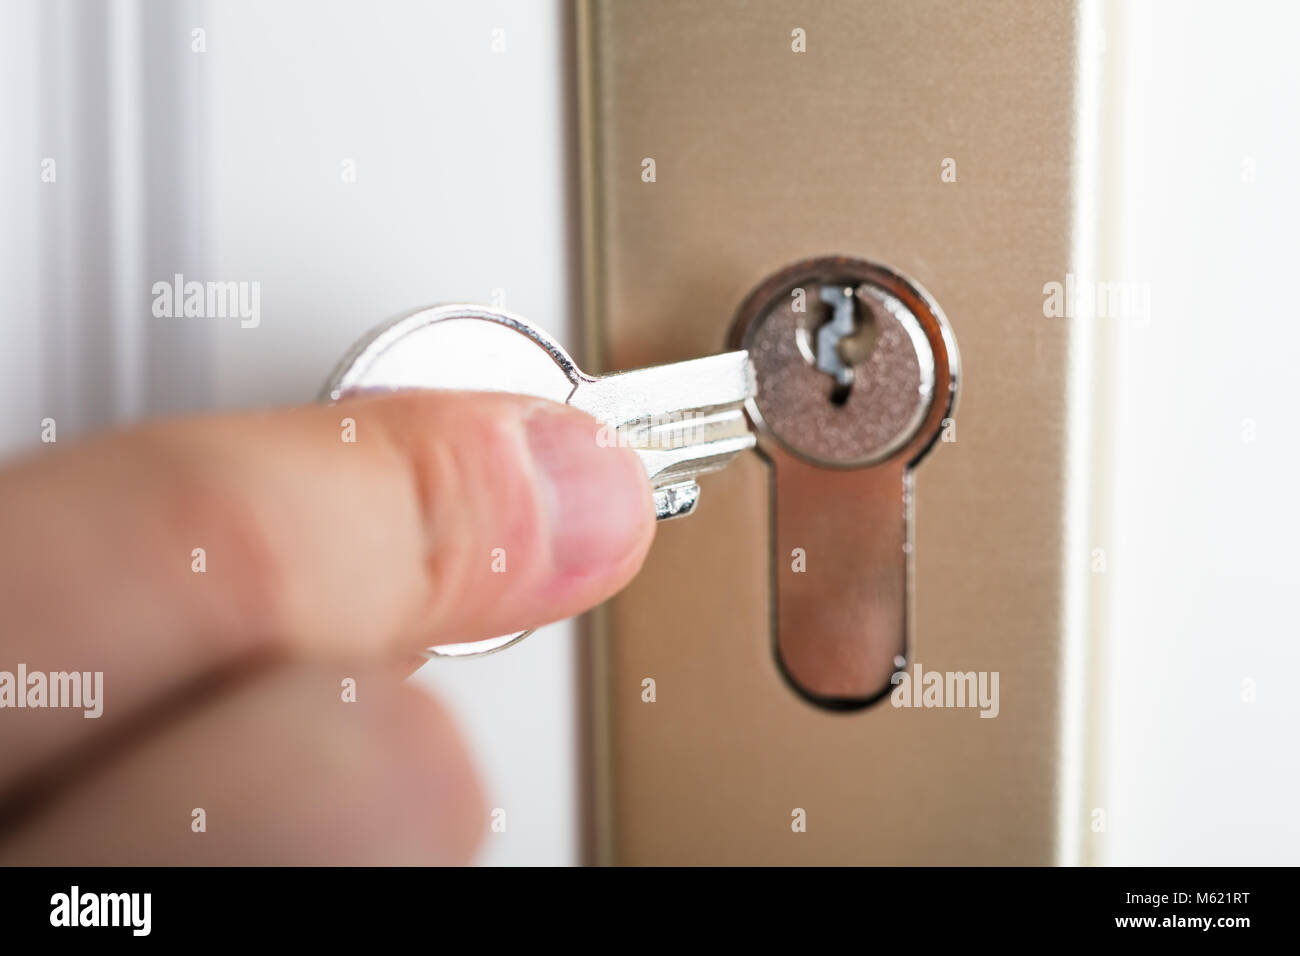 Close-up Of Person's Hand Holding Broken Key Inserting In Keyhole Stock Photo